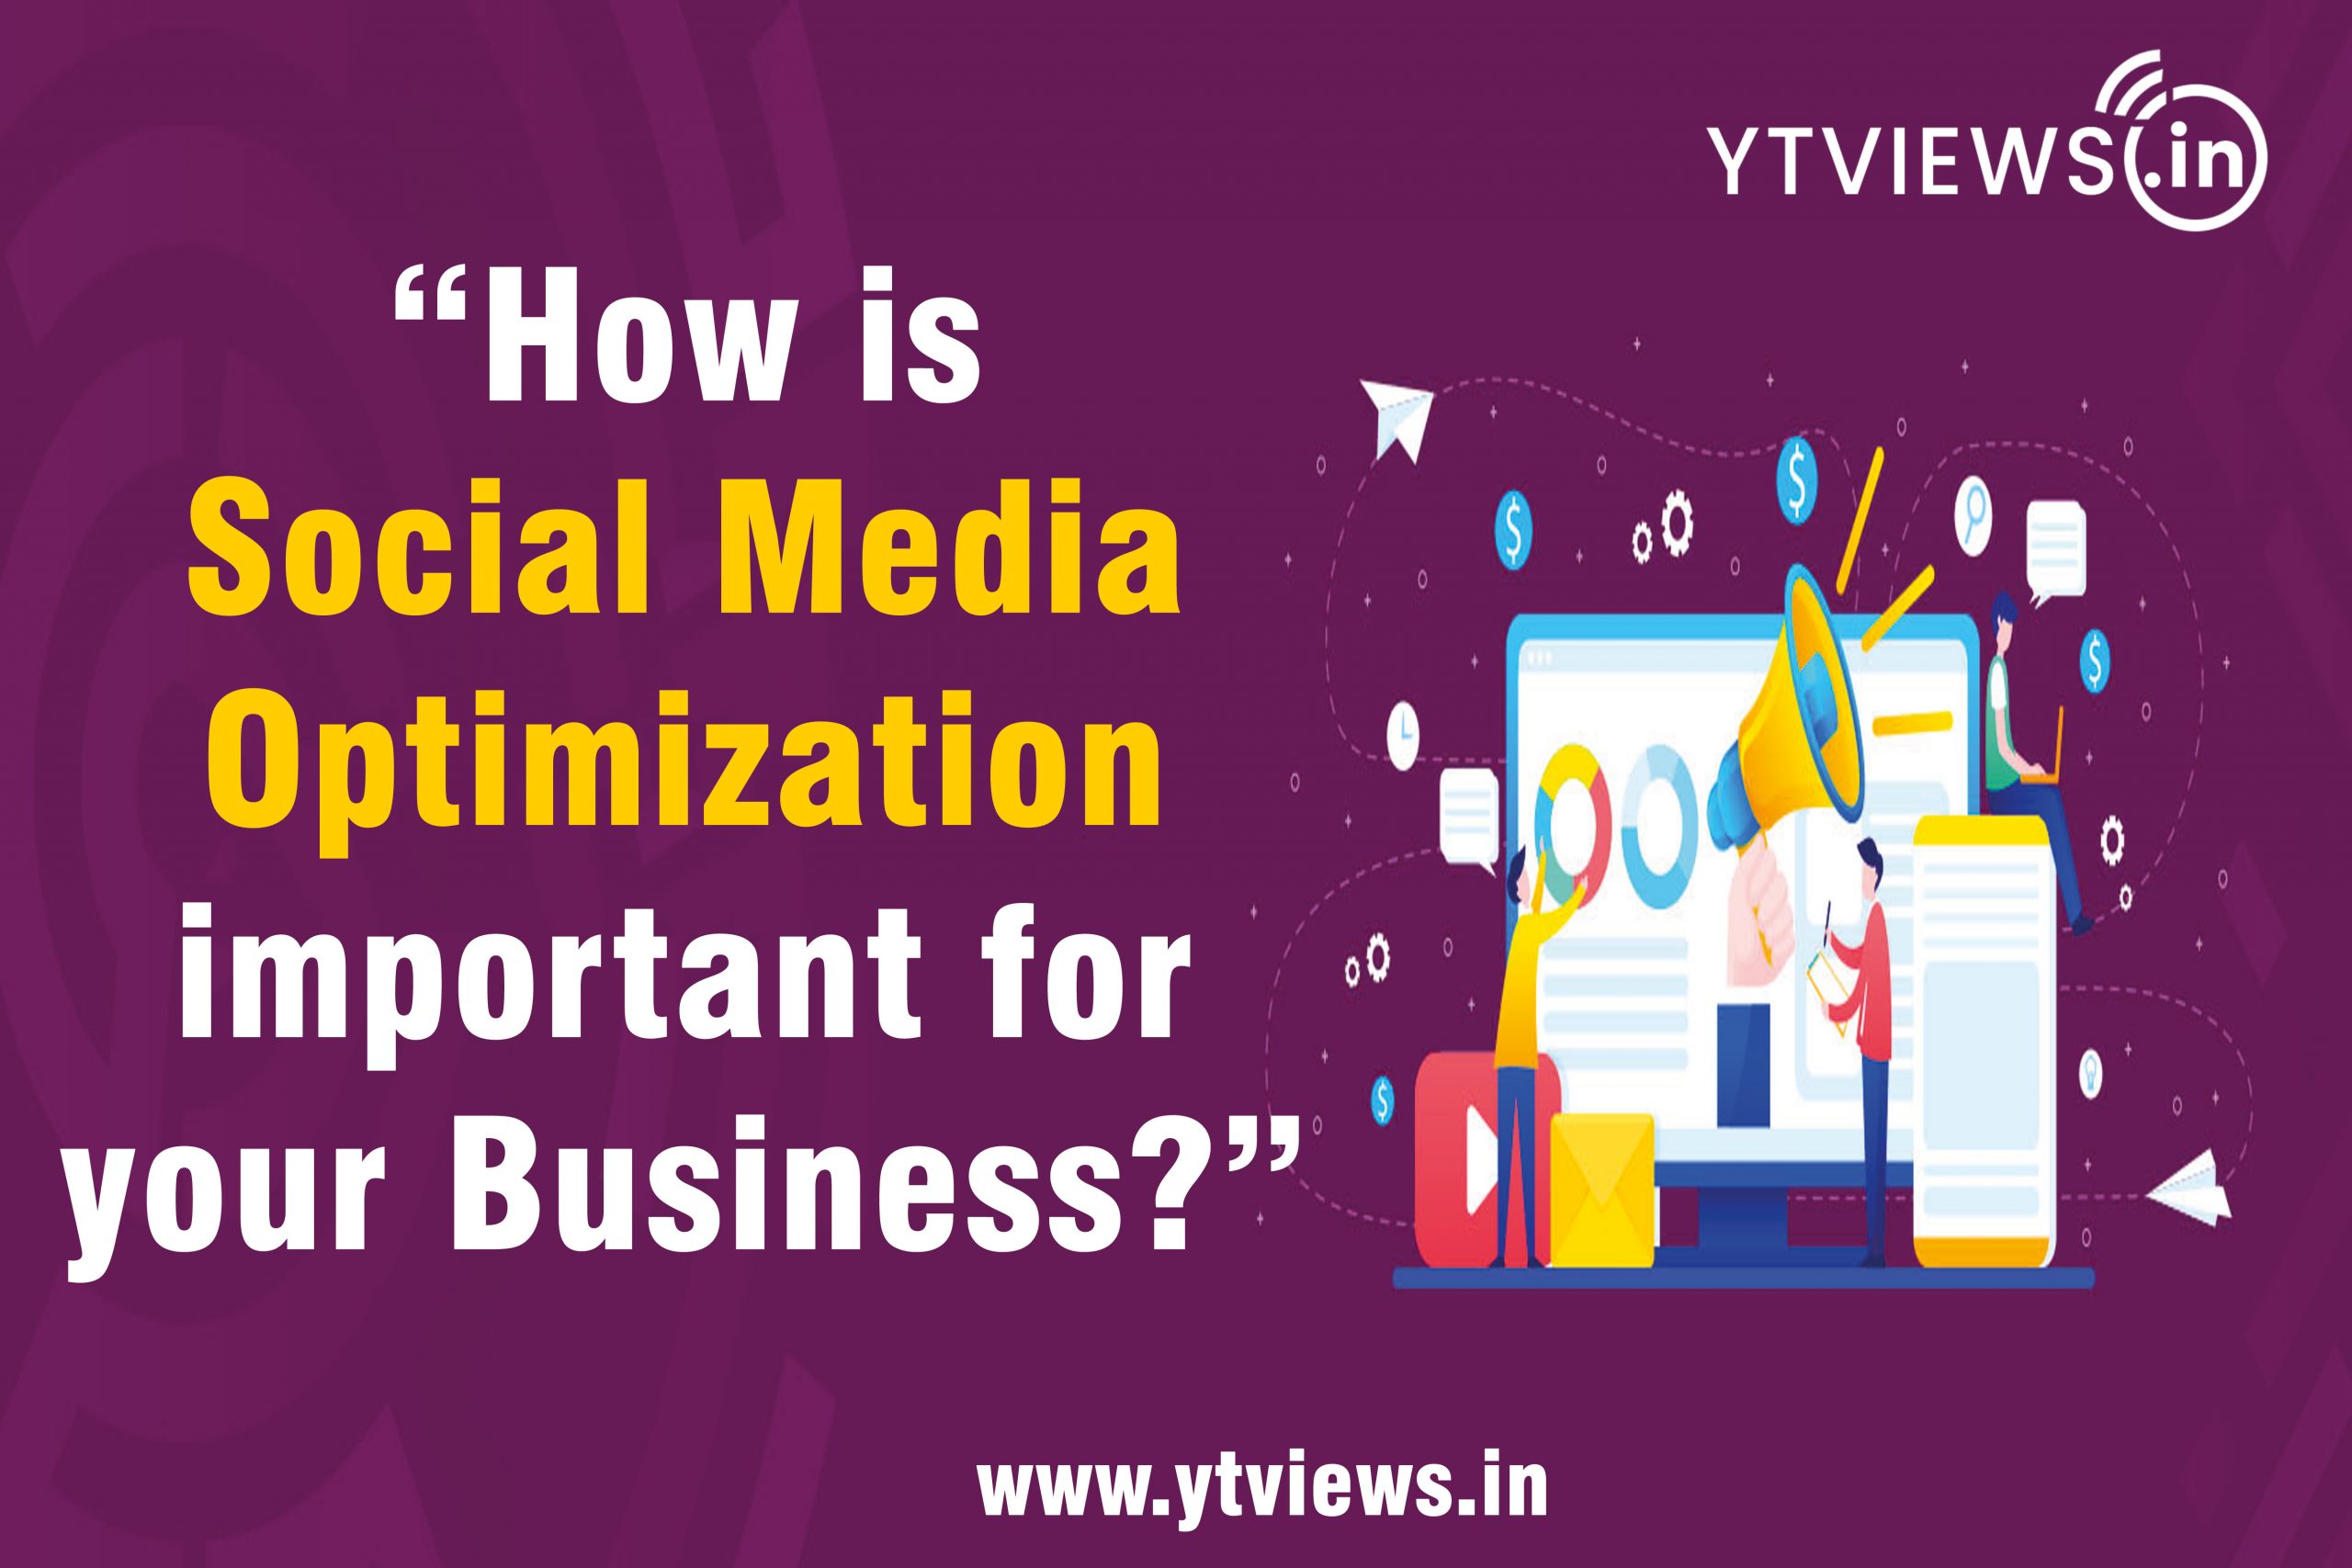 How is social media optimization important for your business?